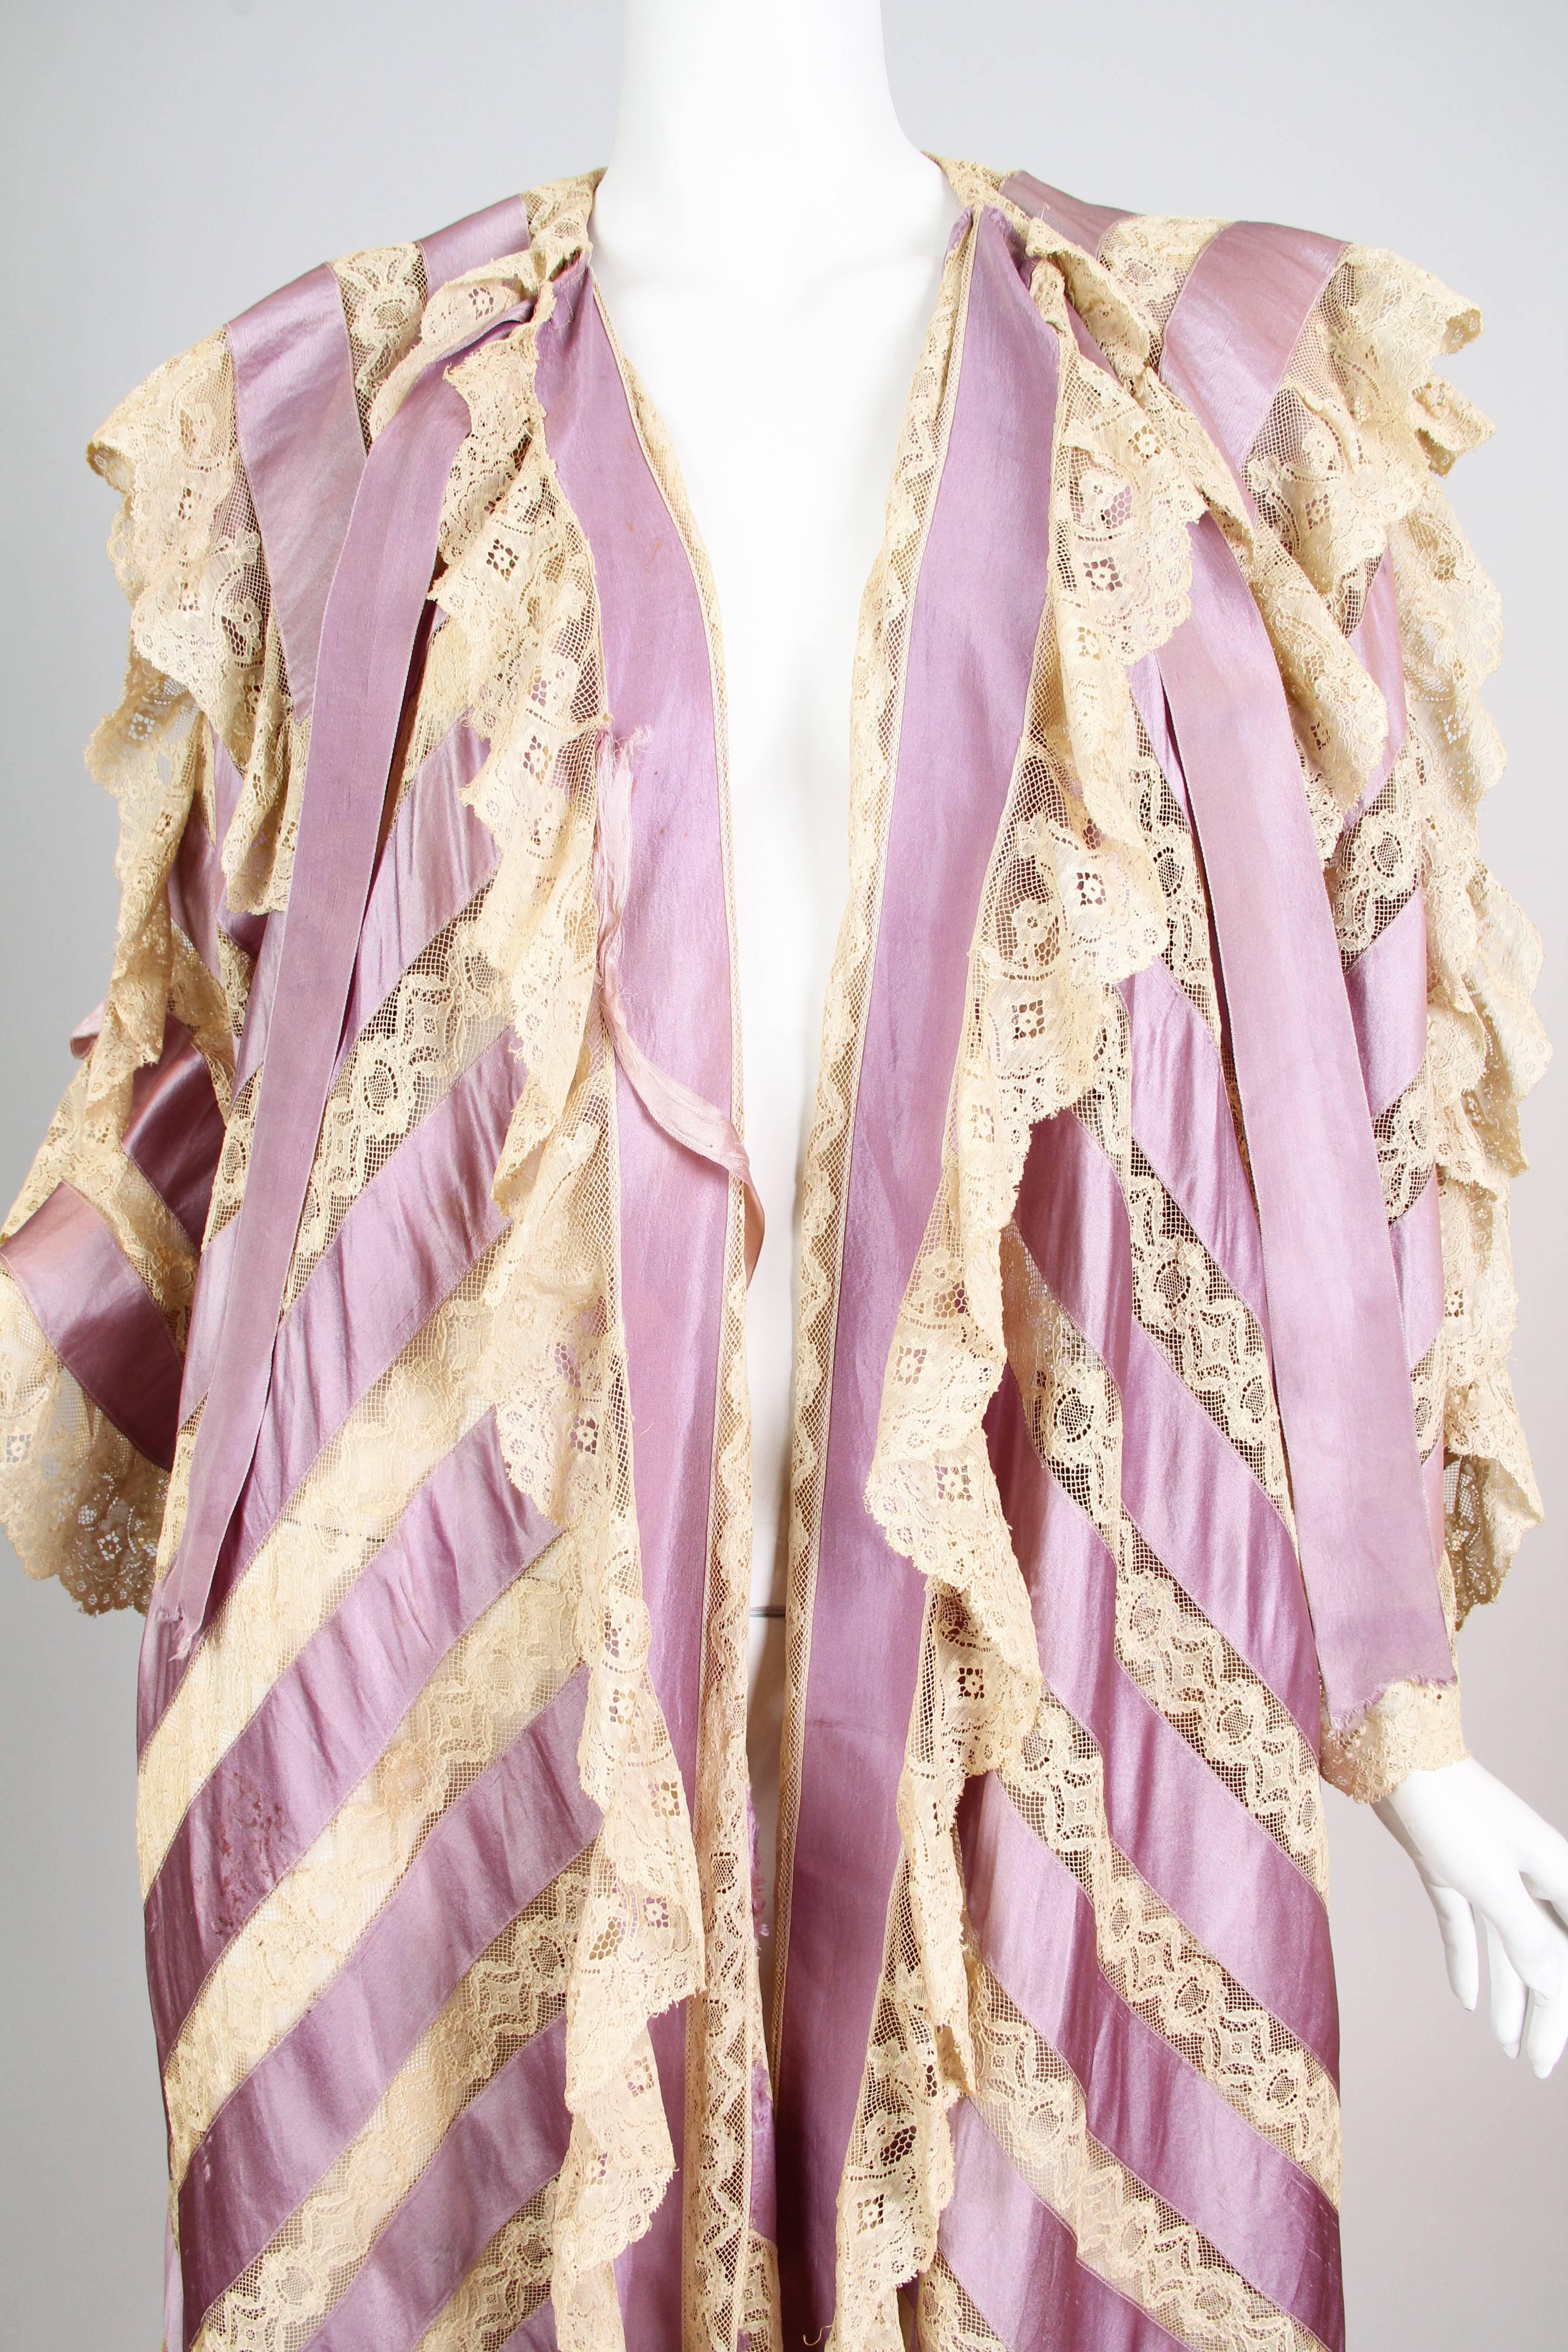 Women's Belle Epoch Ribbon and Lace Duster